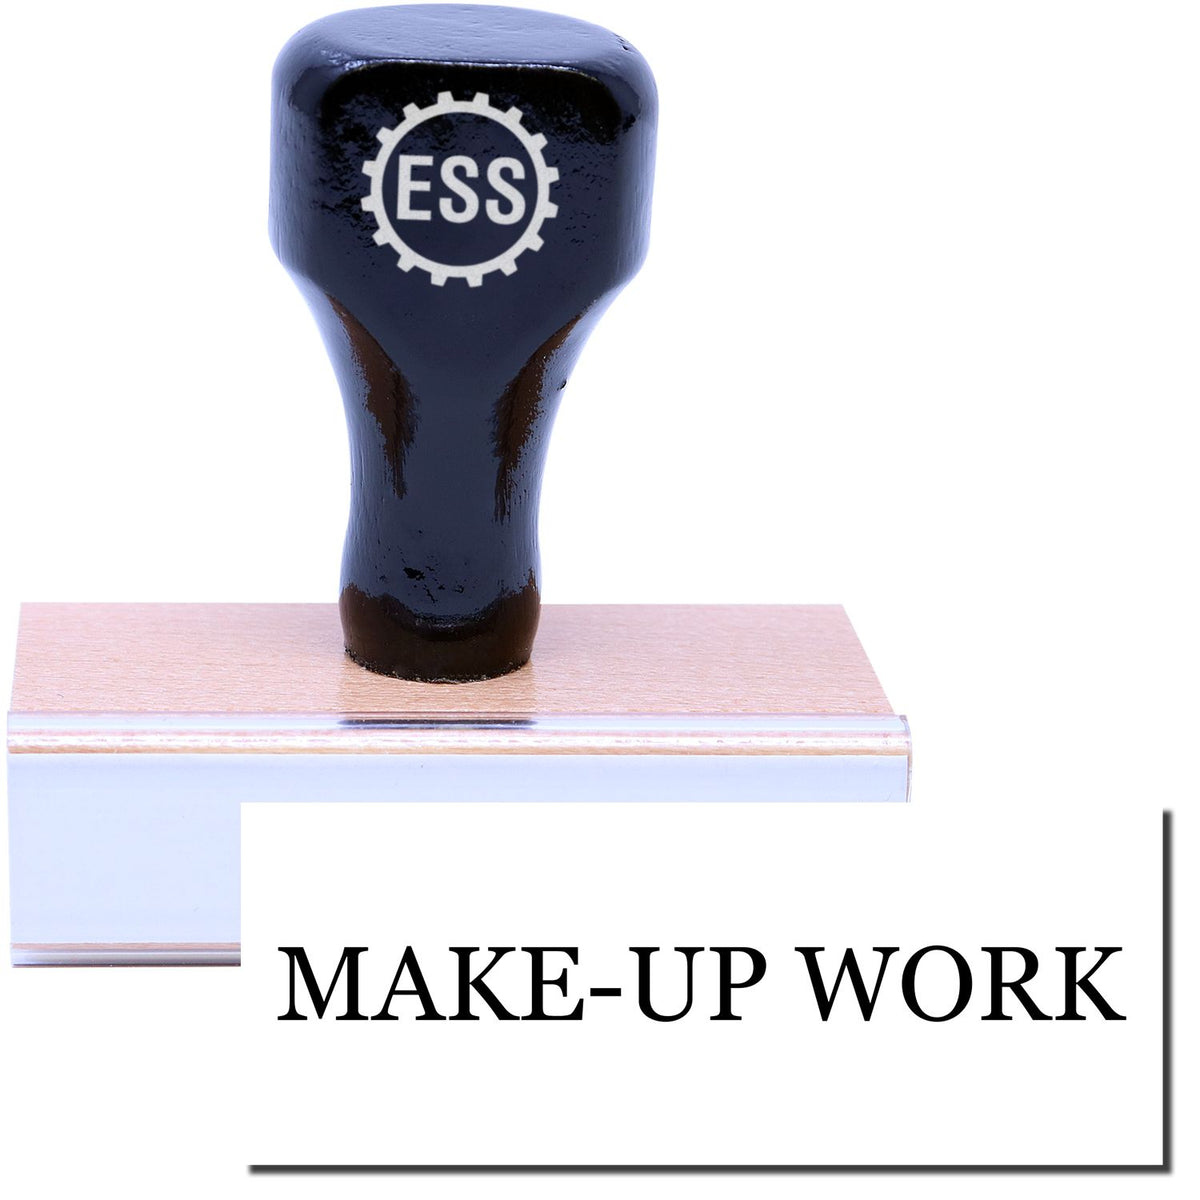 A stock office rubber stamp with a stamped image showing how the text &quot;MAKE-UP WORK&quot; in a large font is displayed after stamping.